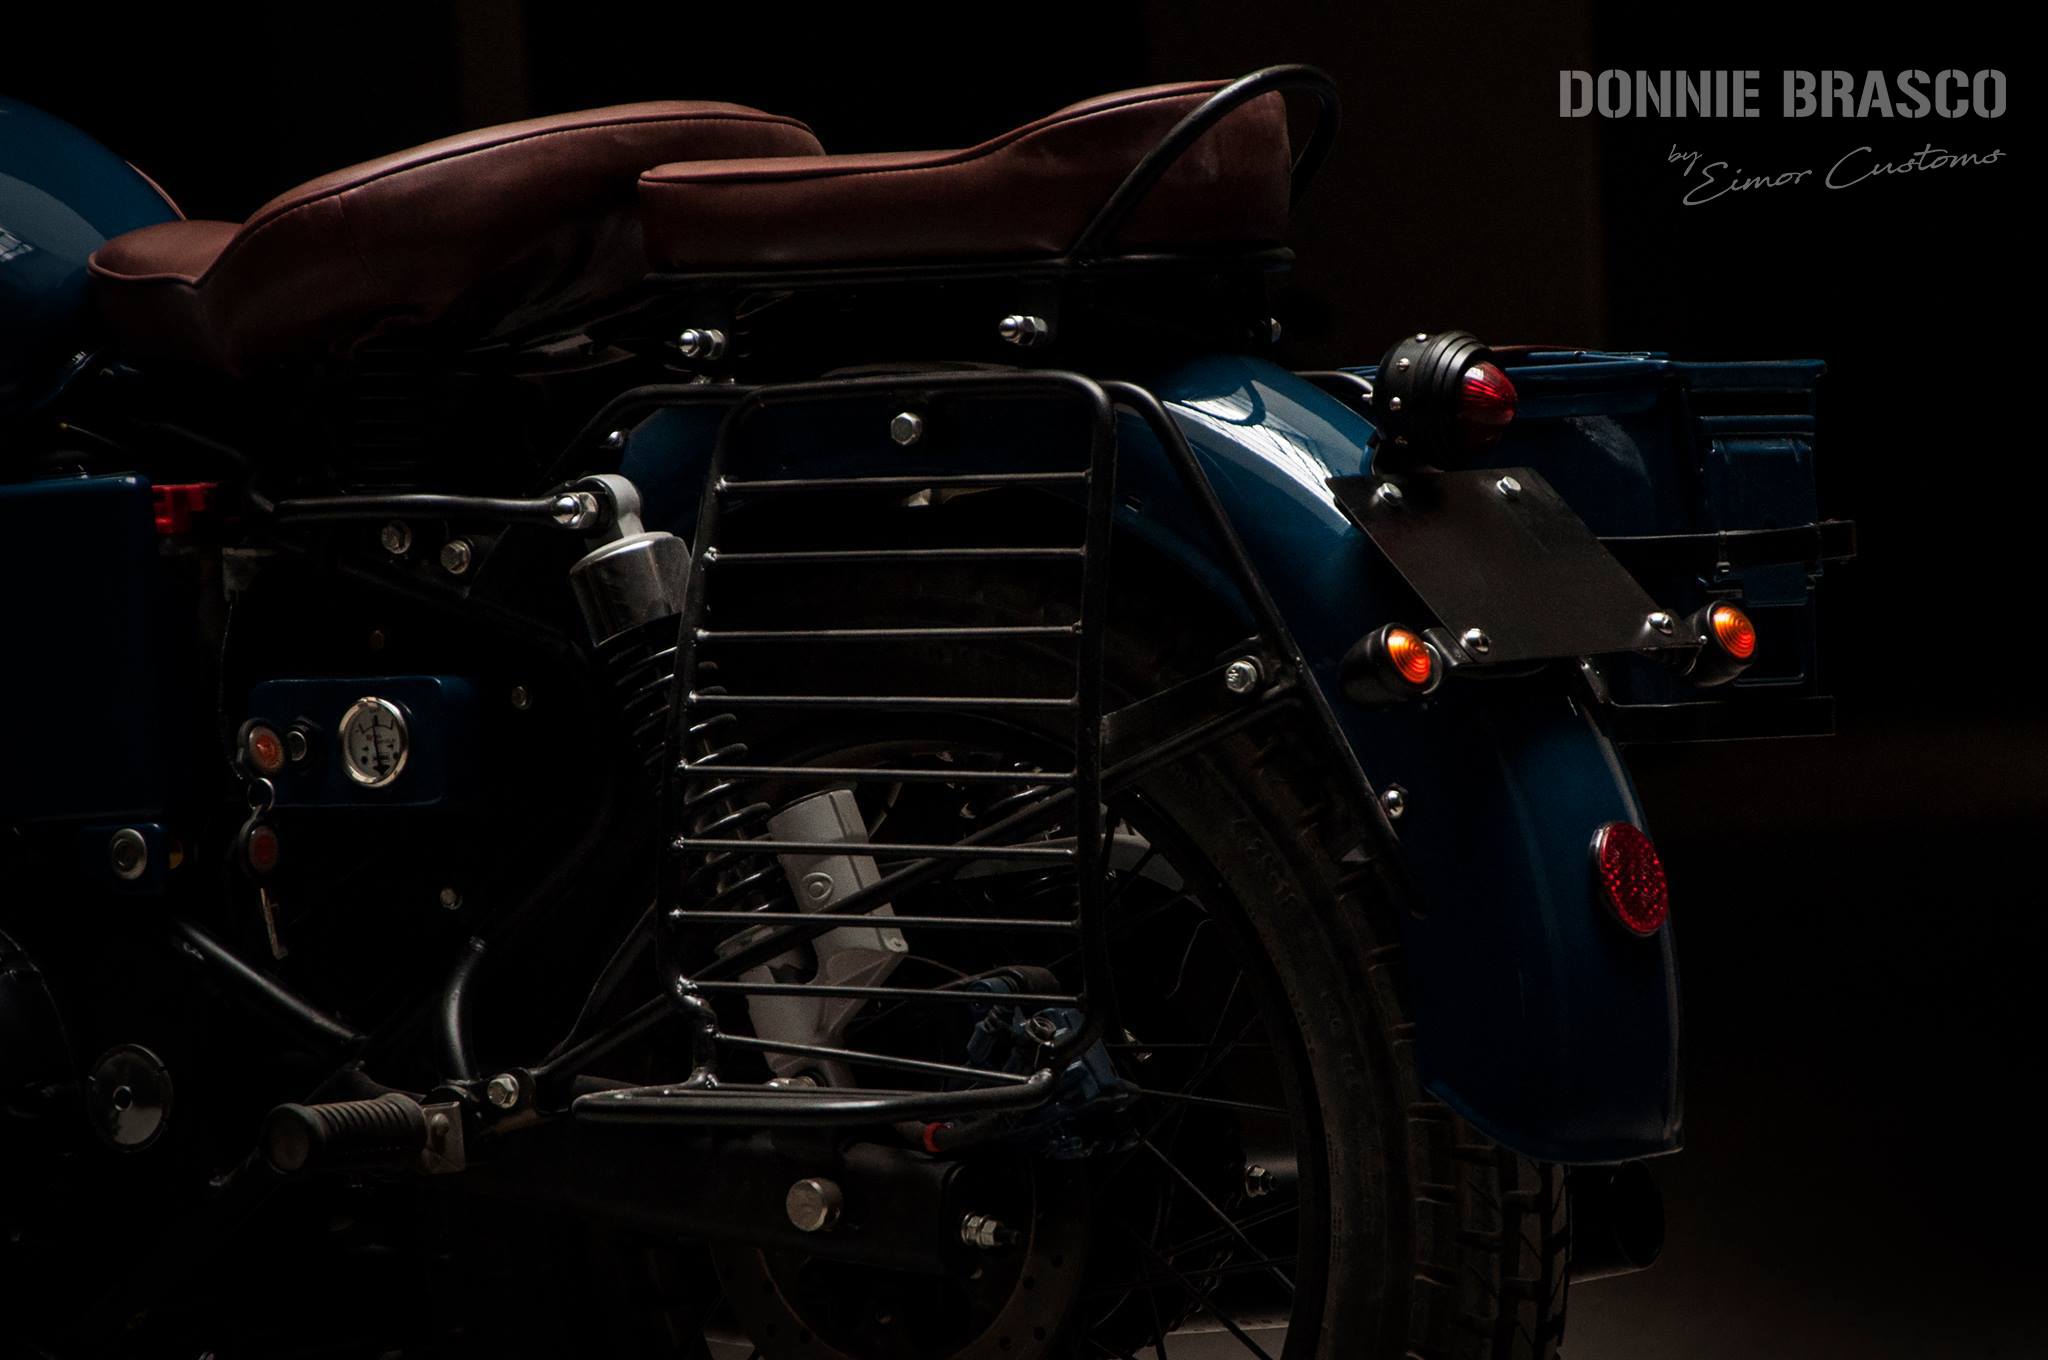 Royal Enfield Classic 'Donnie Brasco' Edition Details and Photos - macro